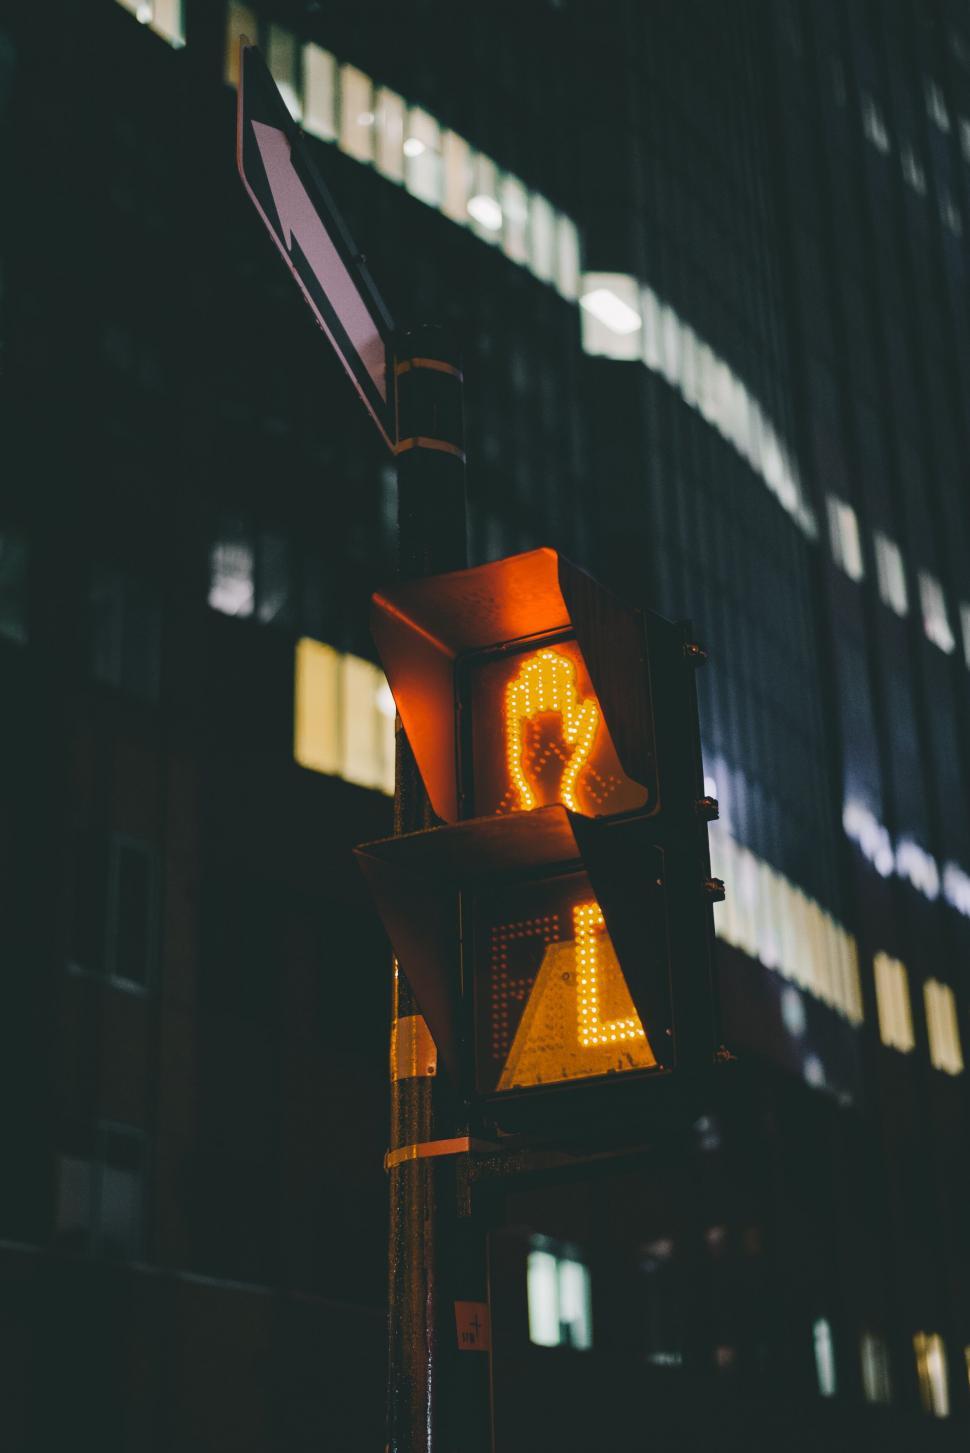 Free Image of A traffic light with a person walking sign 